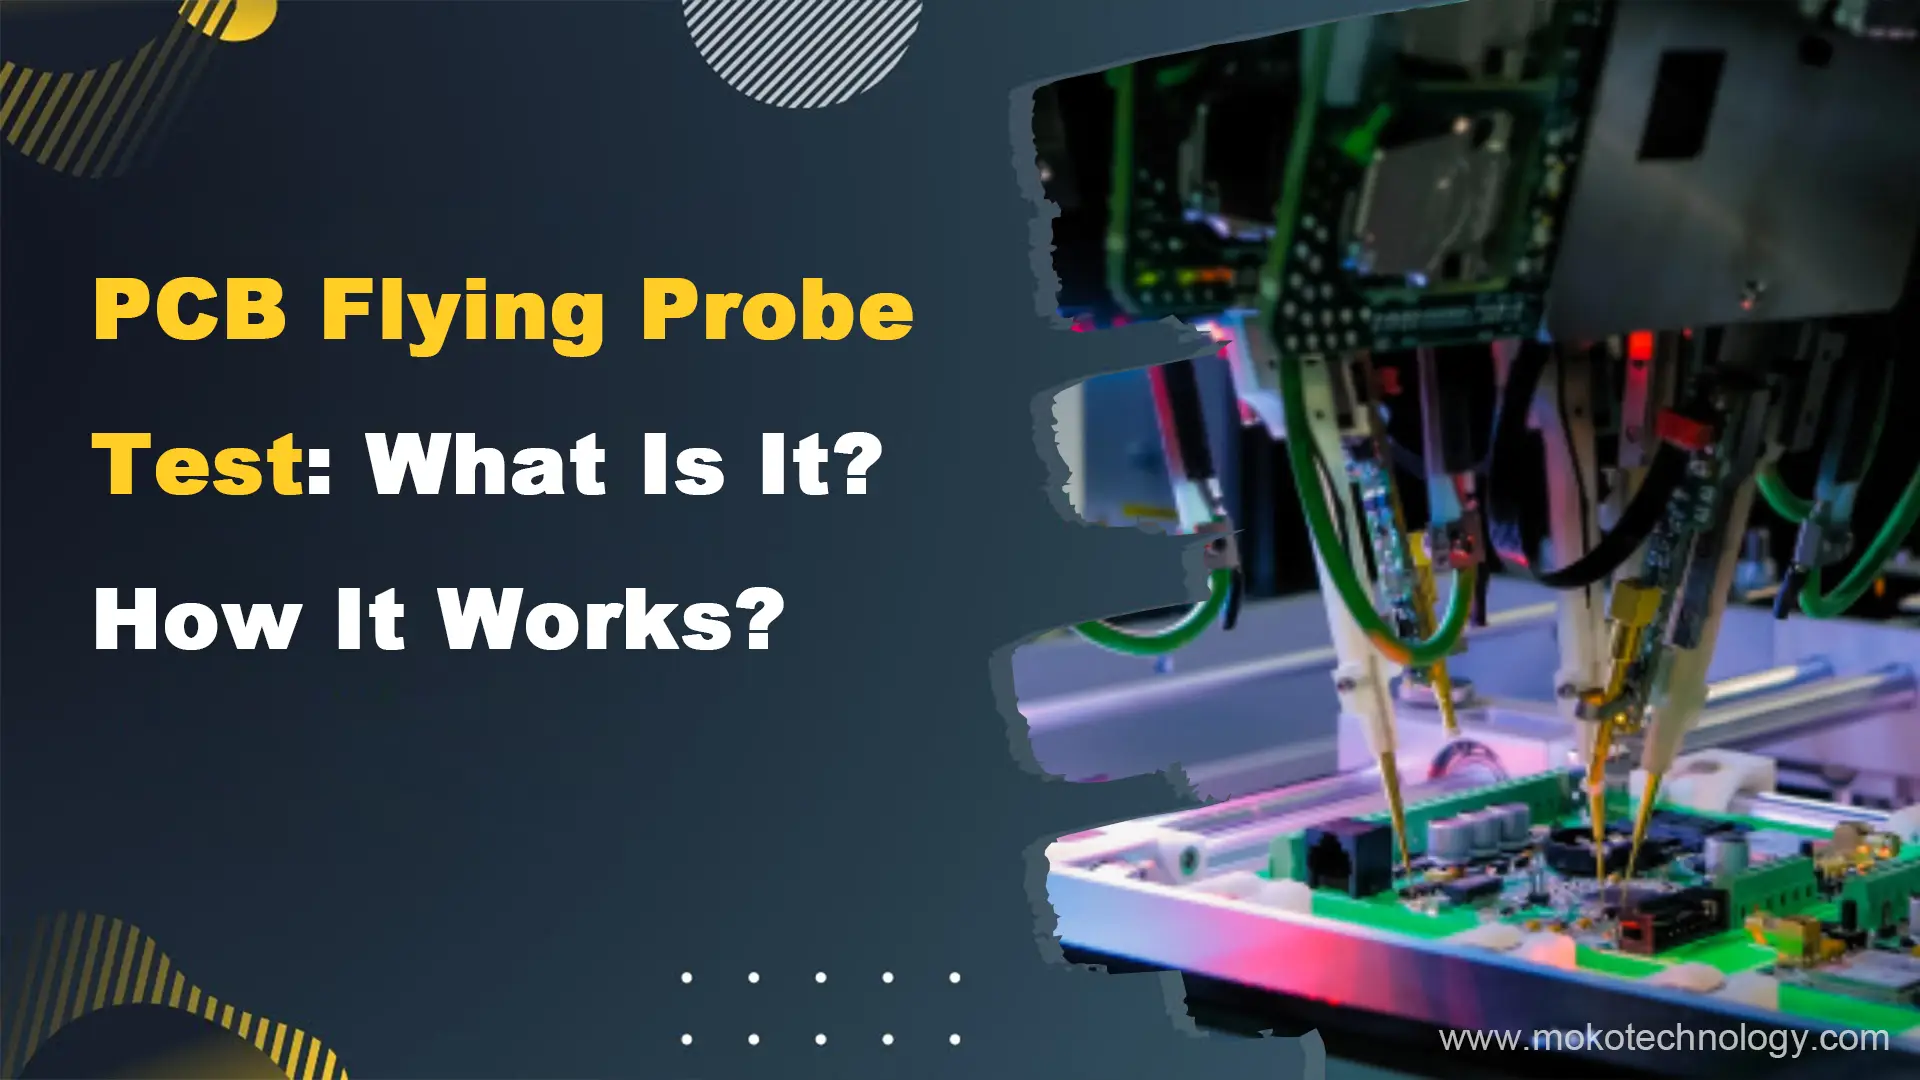 PCB Flying Probe Test Guide